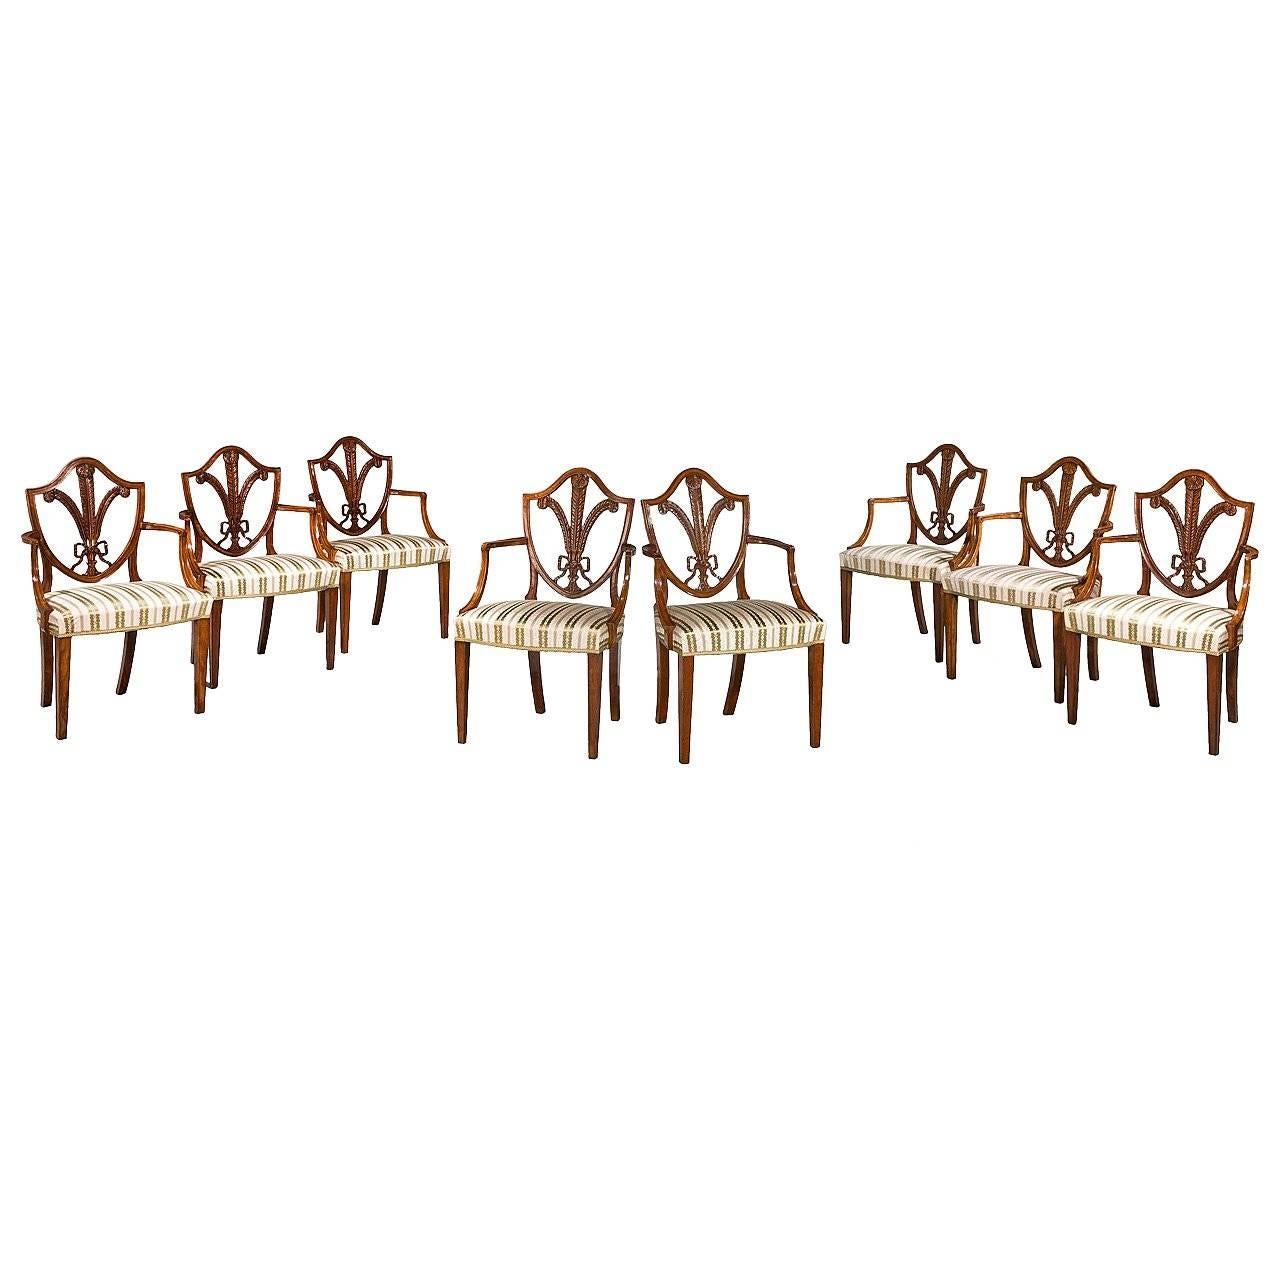 Set of 12 George III Period Satinwood Elbow Chairs by Gillows